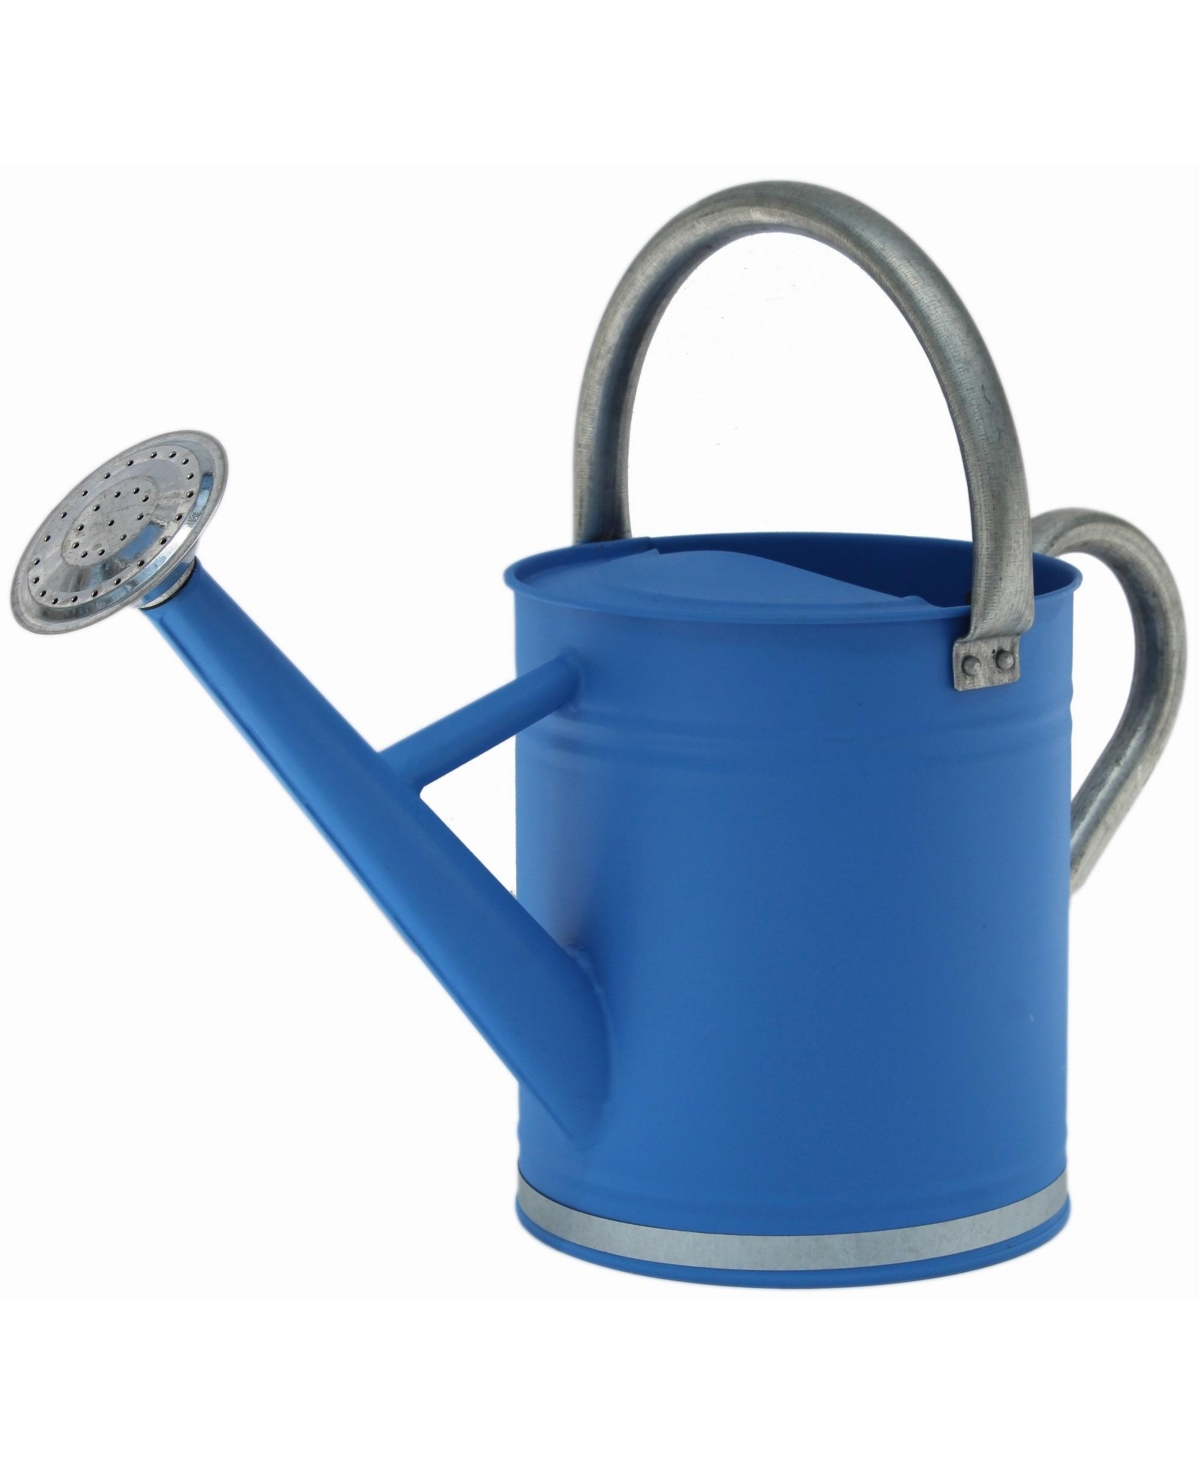 Gardener Select Metal Watering Can, Blue Galvanized Accents, 0.92 Gal - Blue